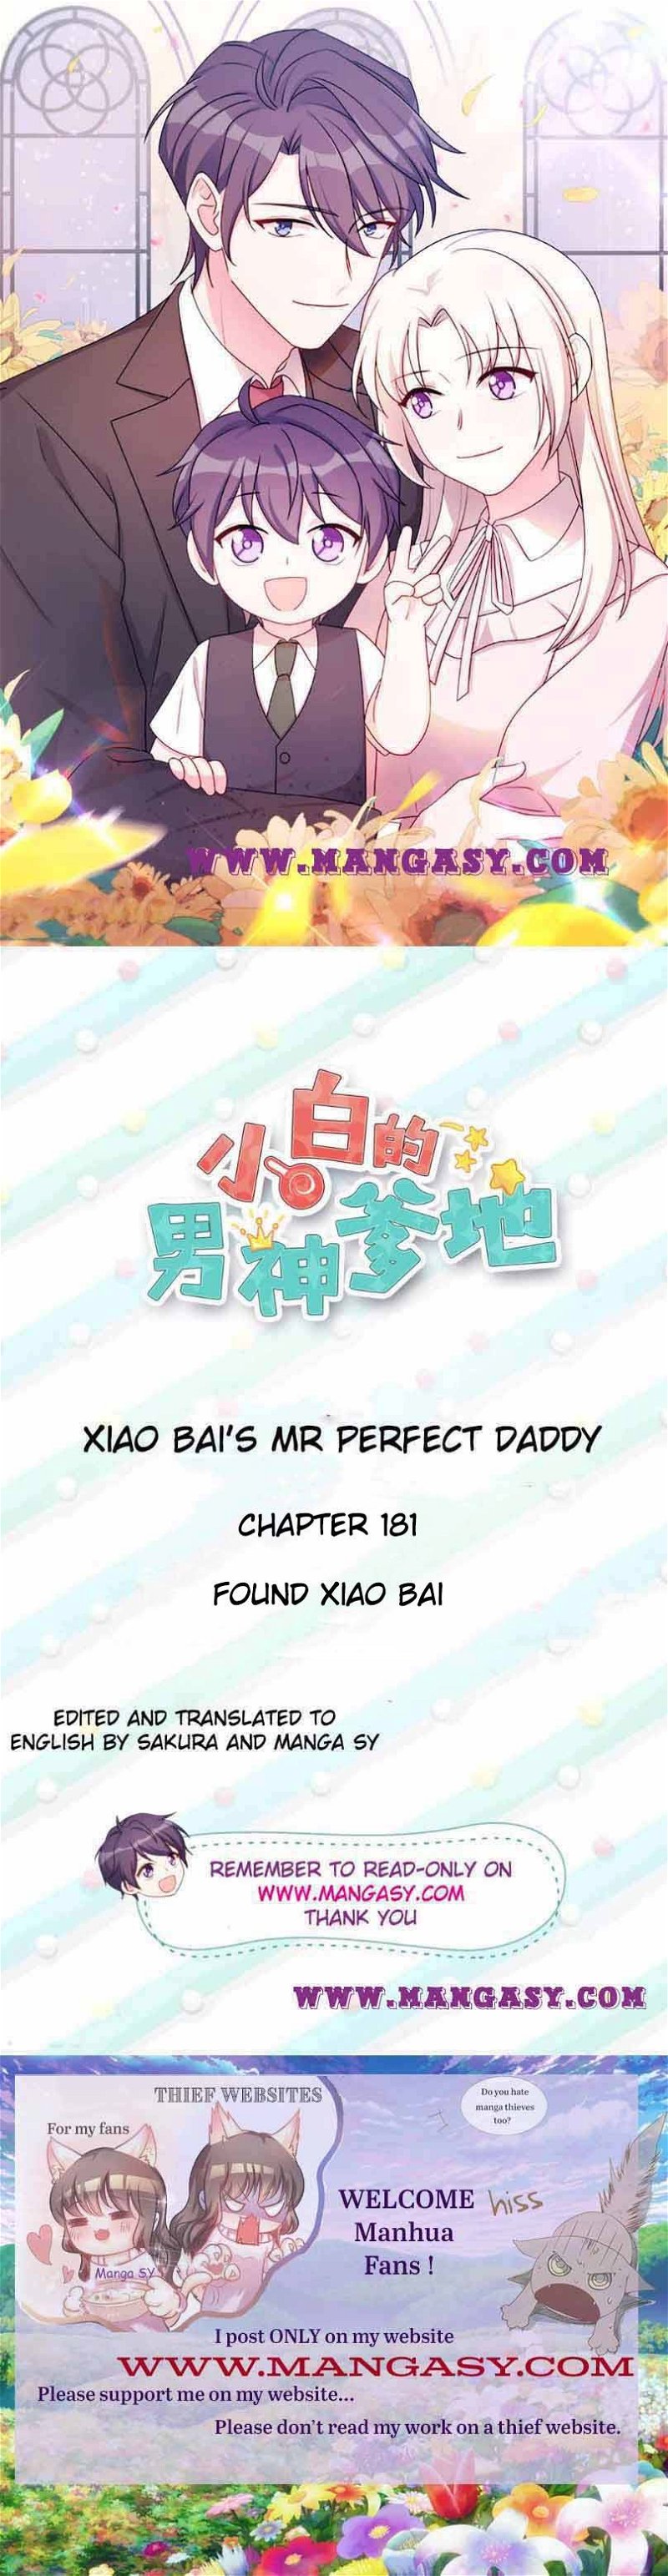 Xiao Bai’s father is a wonderful person Chapter 181 - Page 0